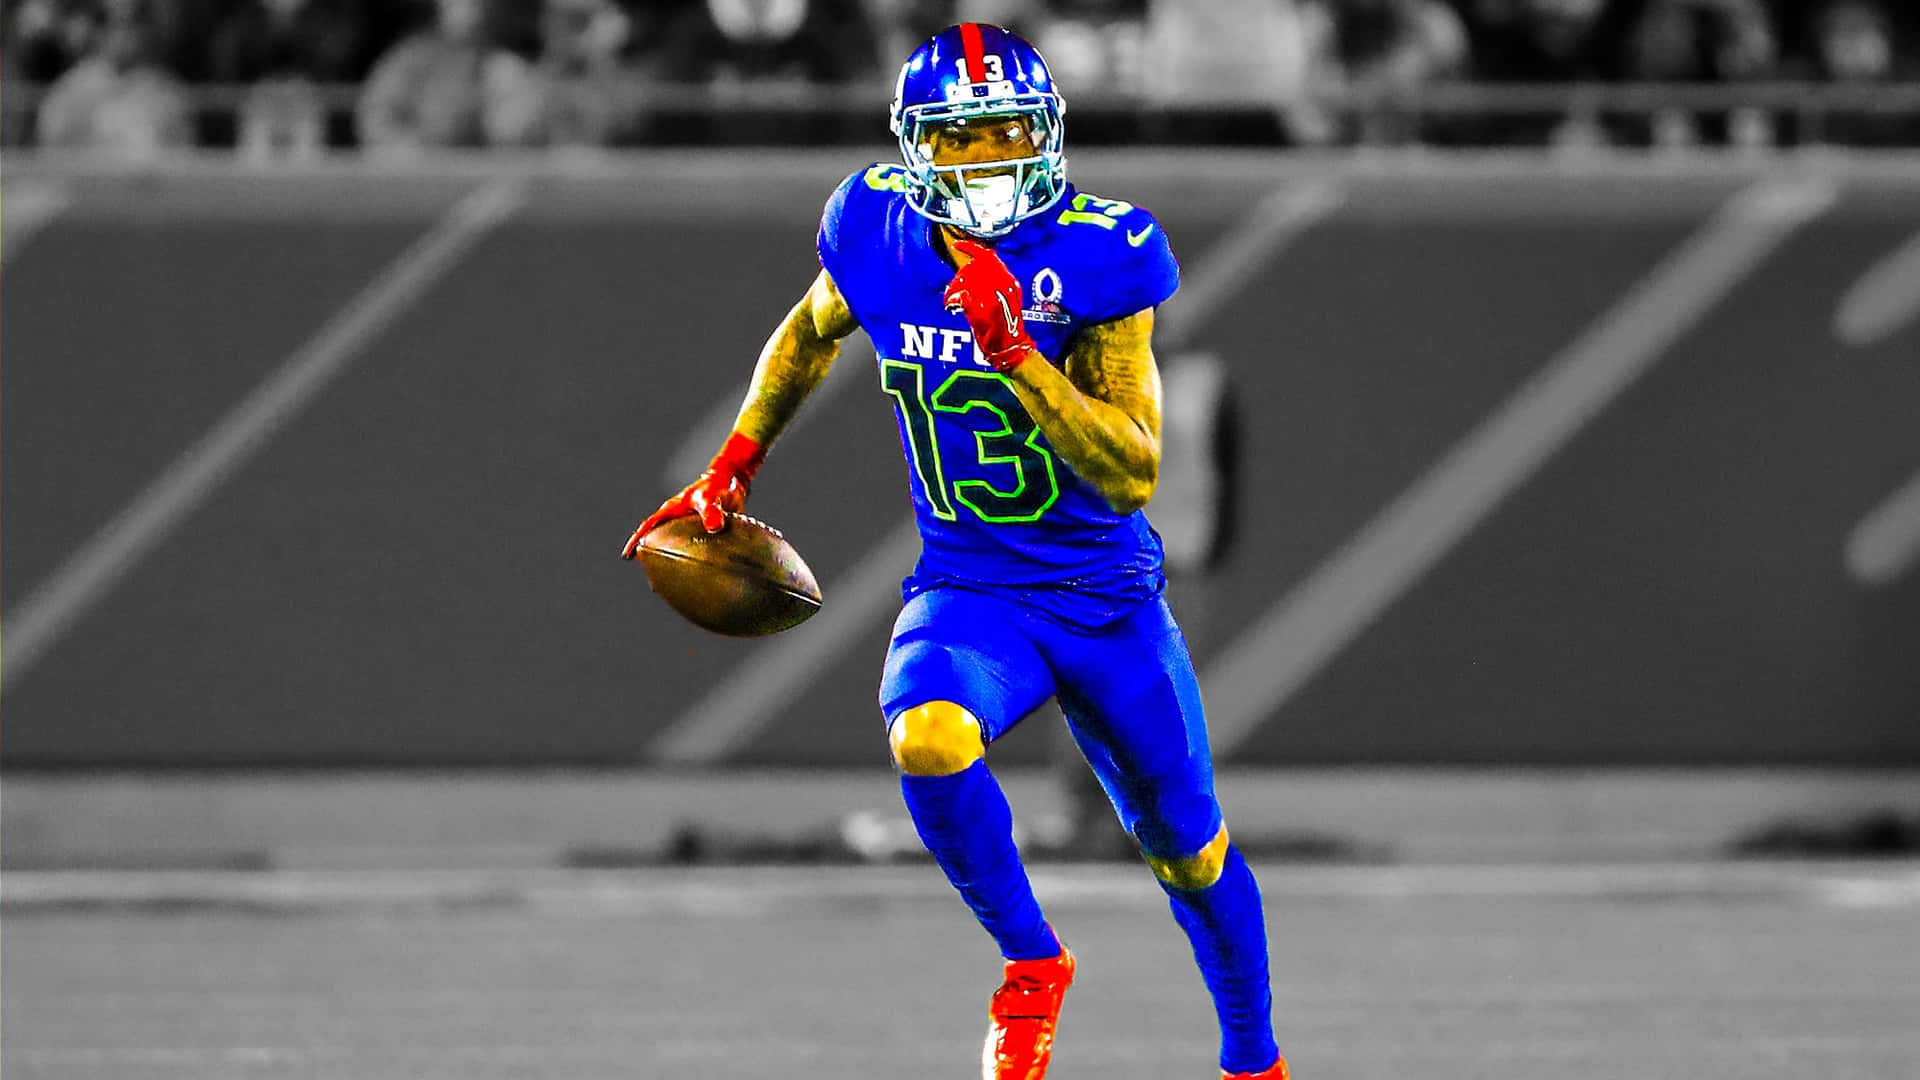 Pro Bowl Players In Action Wallpaper